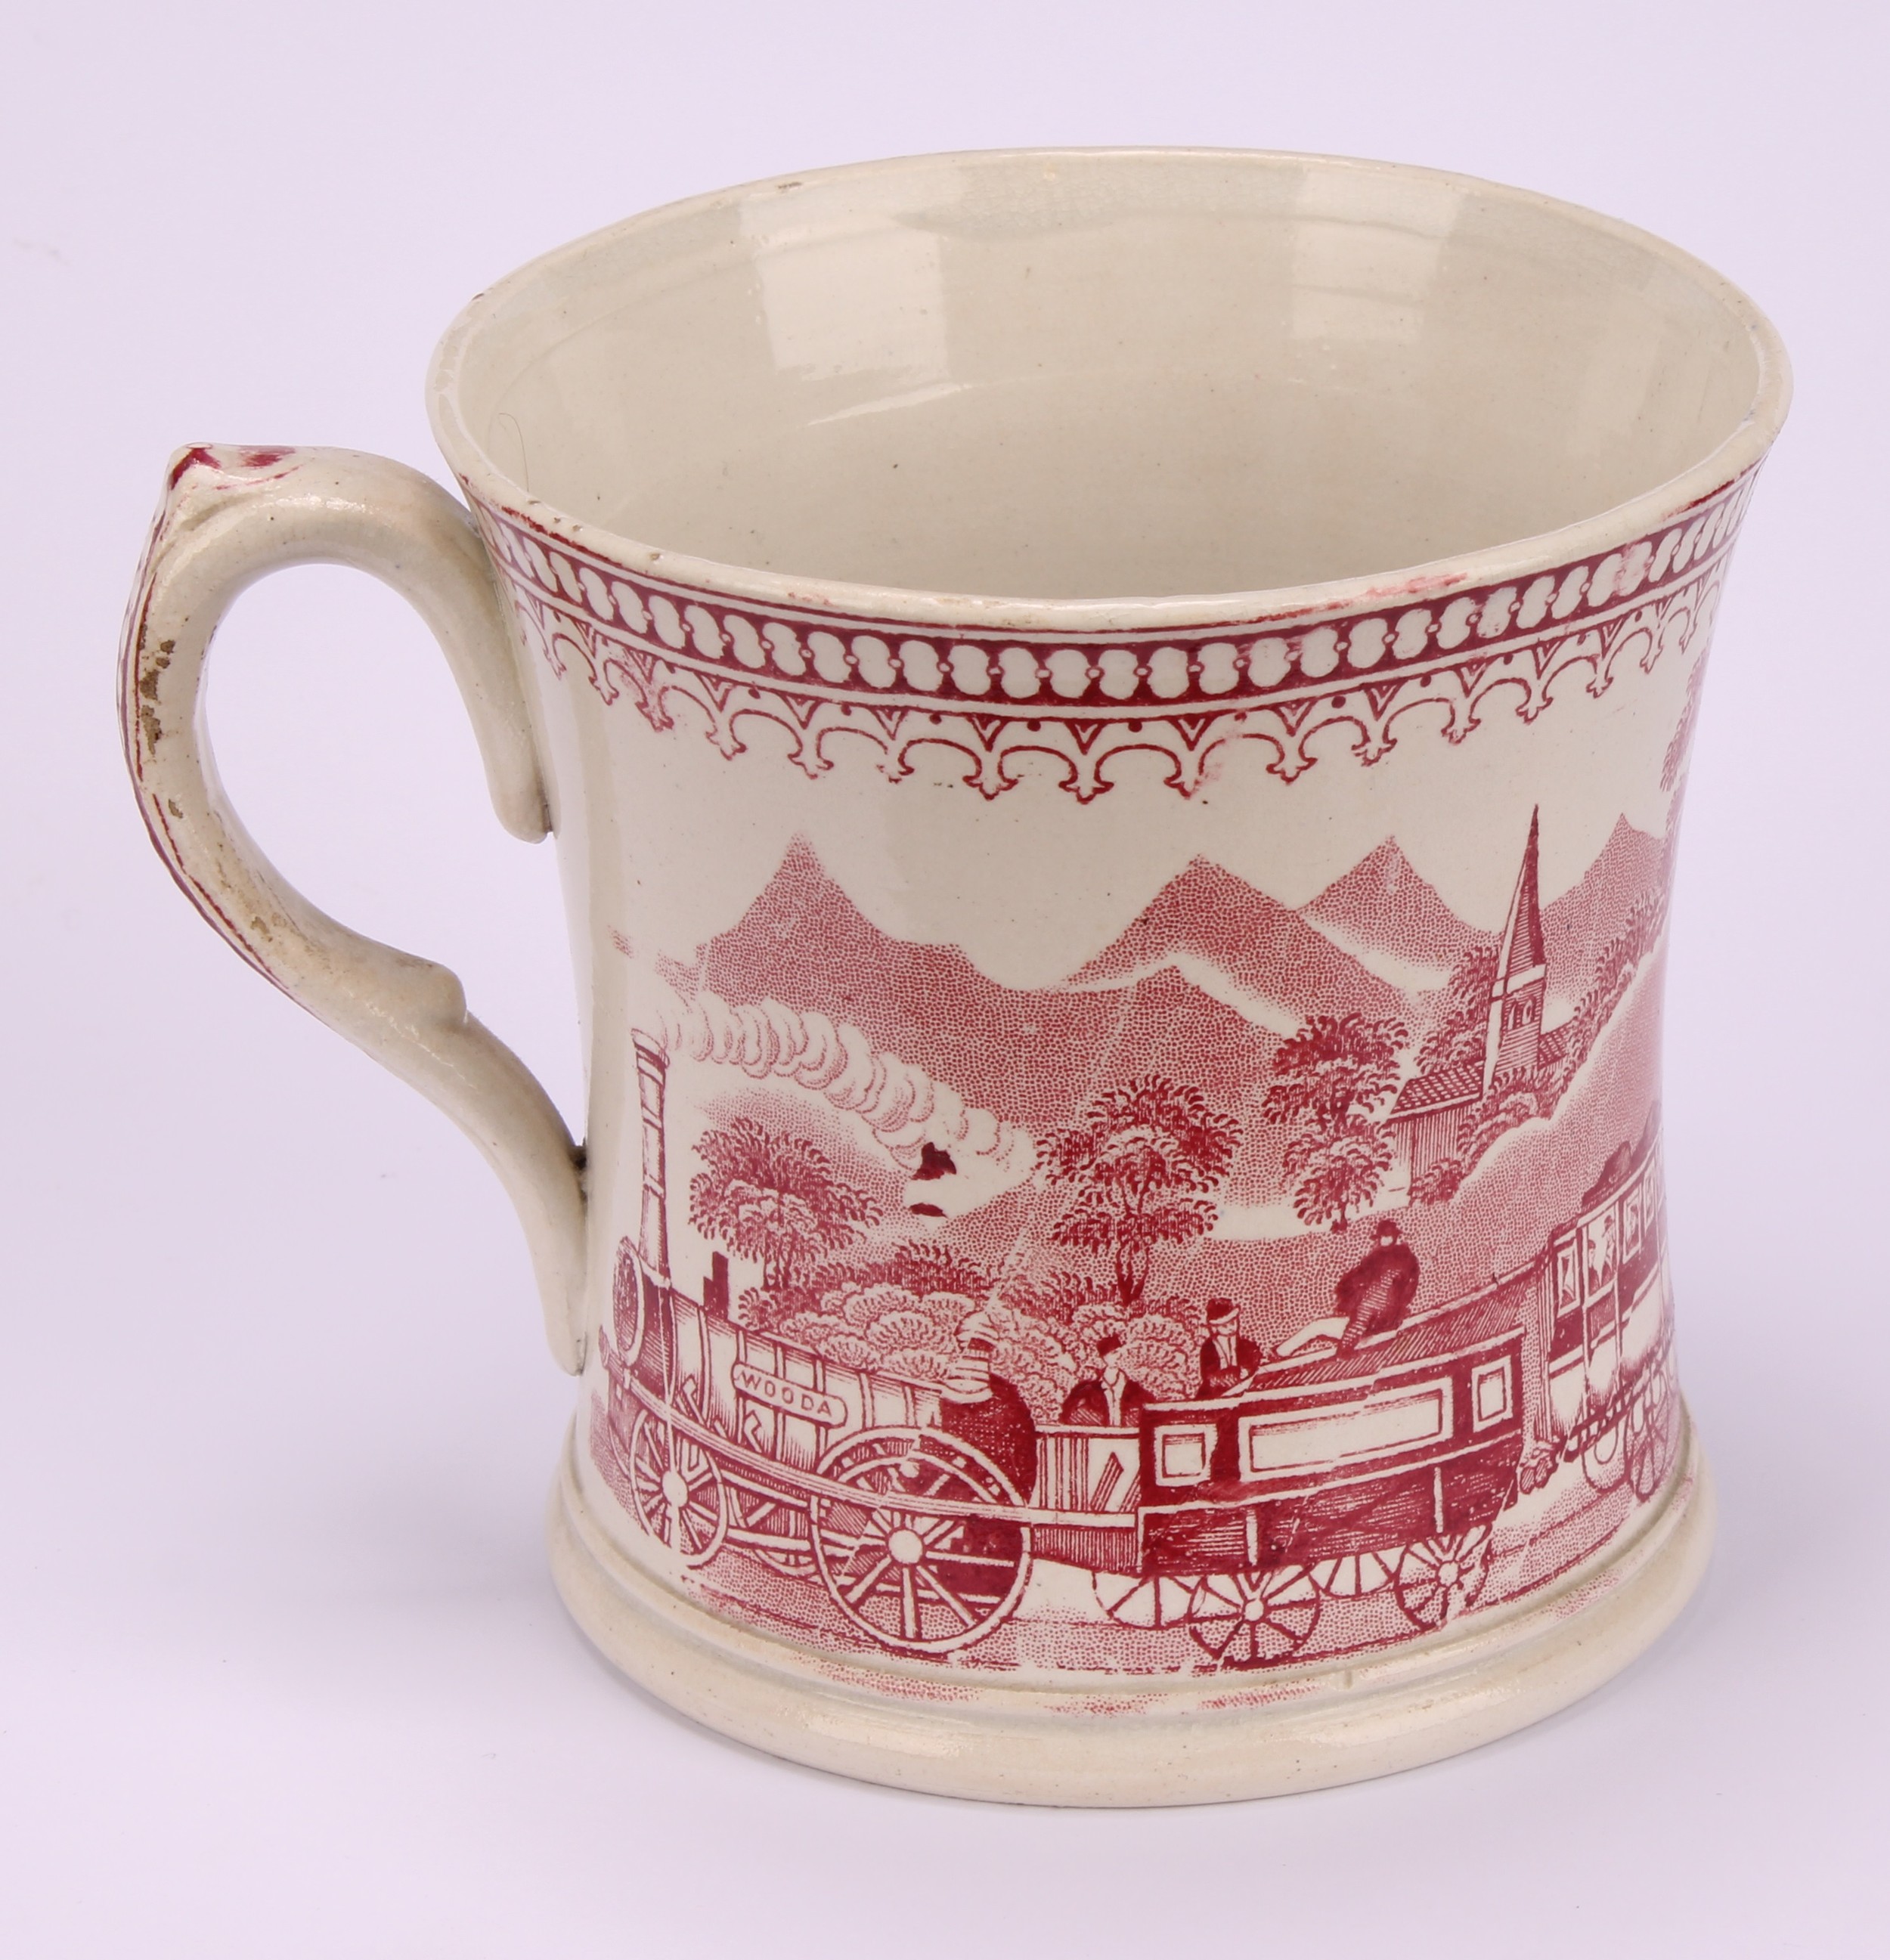 Railway Interest - steam locomotives, a 19th century Staffordshire pearlware mug, printed in sepia - Image 5 of 8